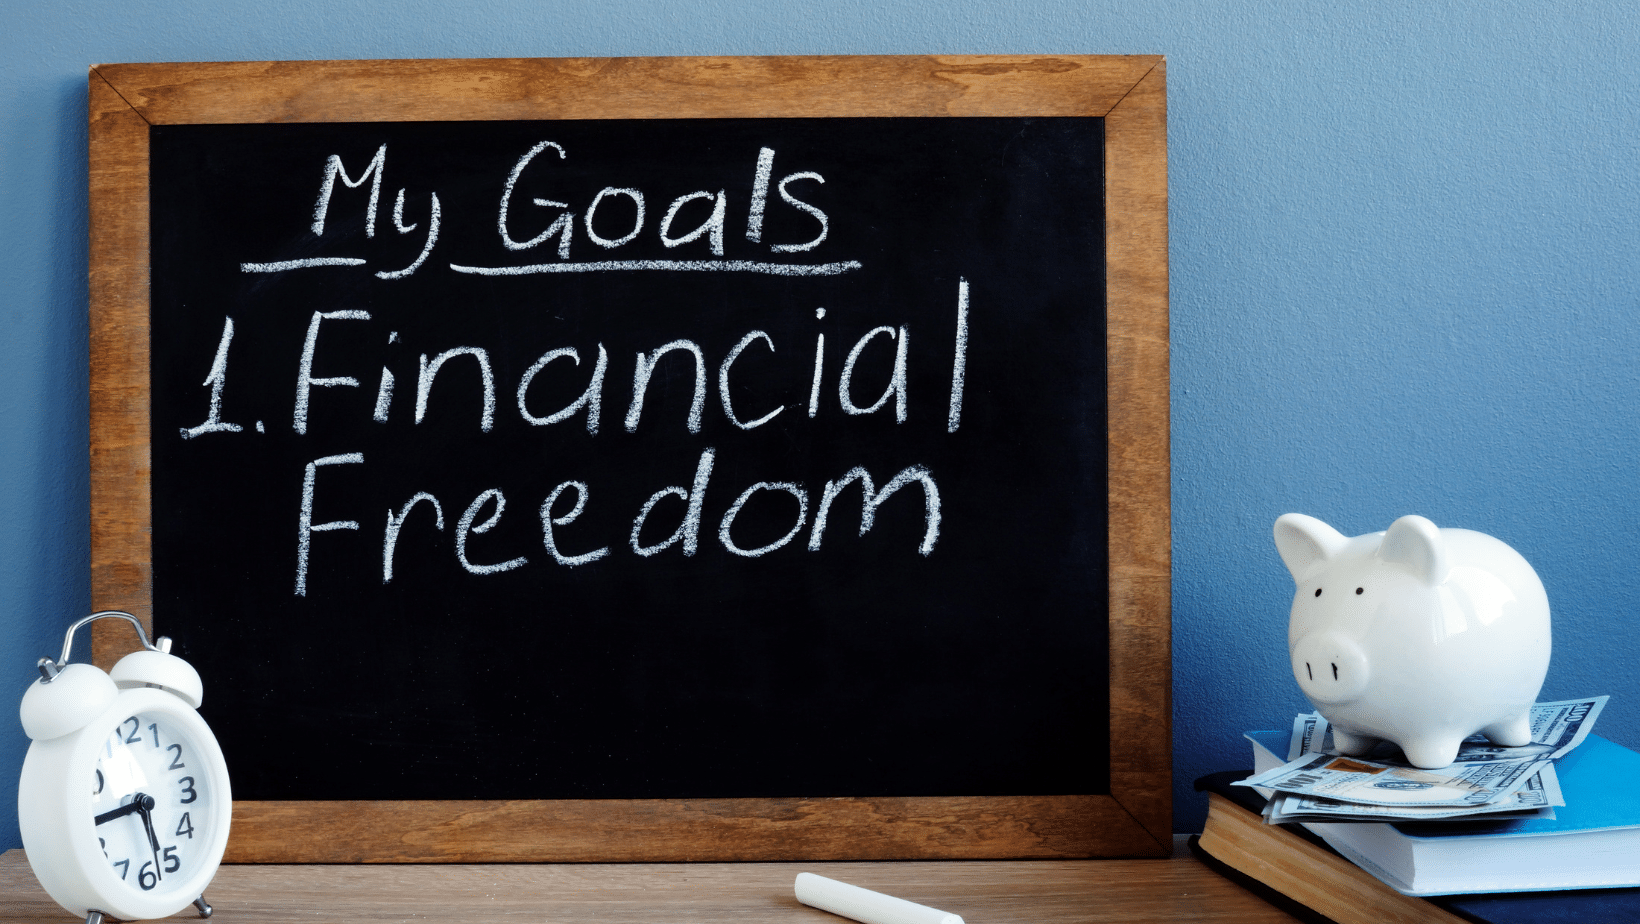 Create Your Goals Towards Financial Financial Freedom With These Tips!